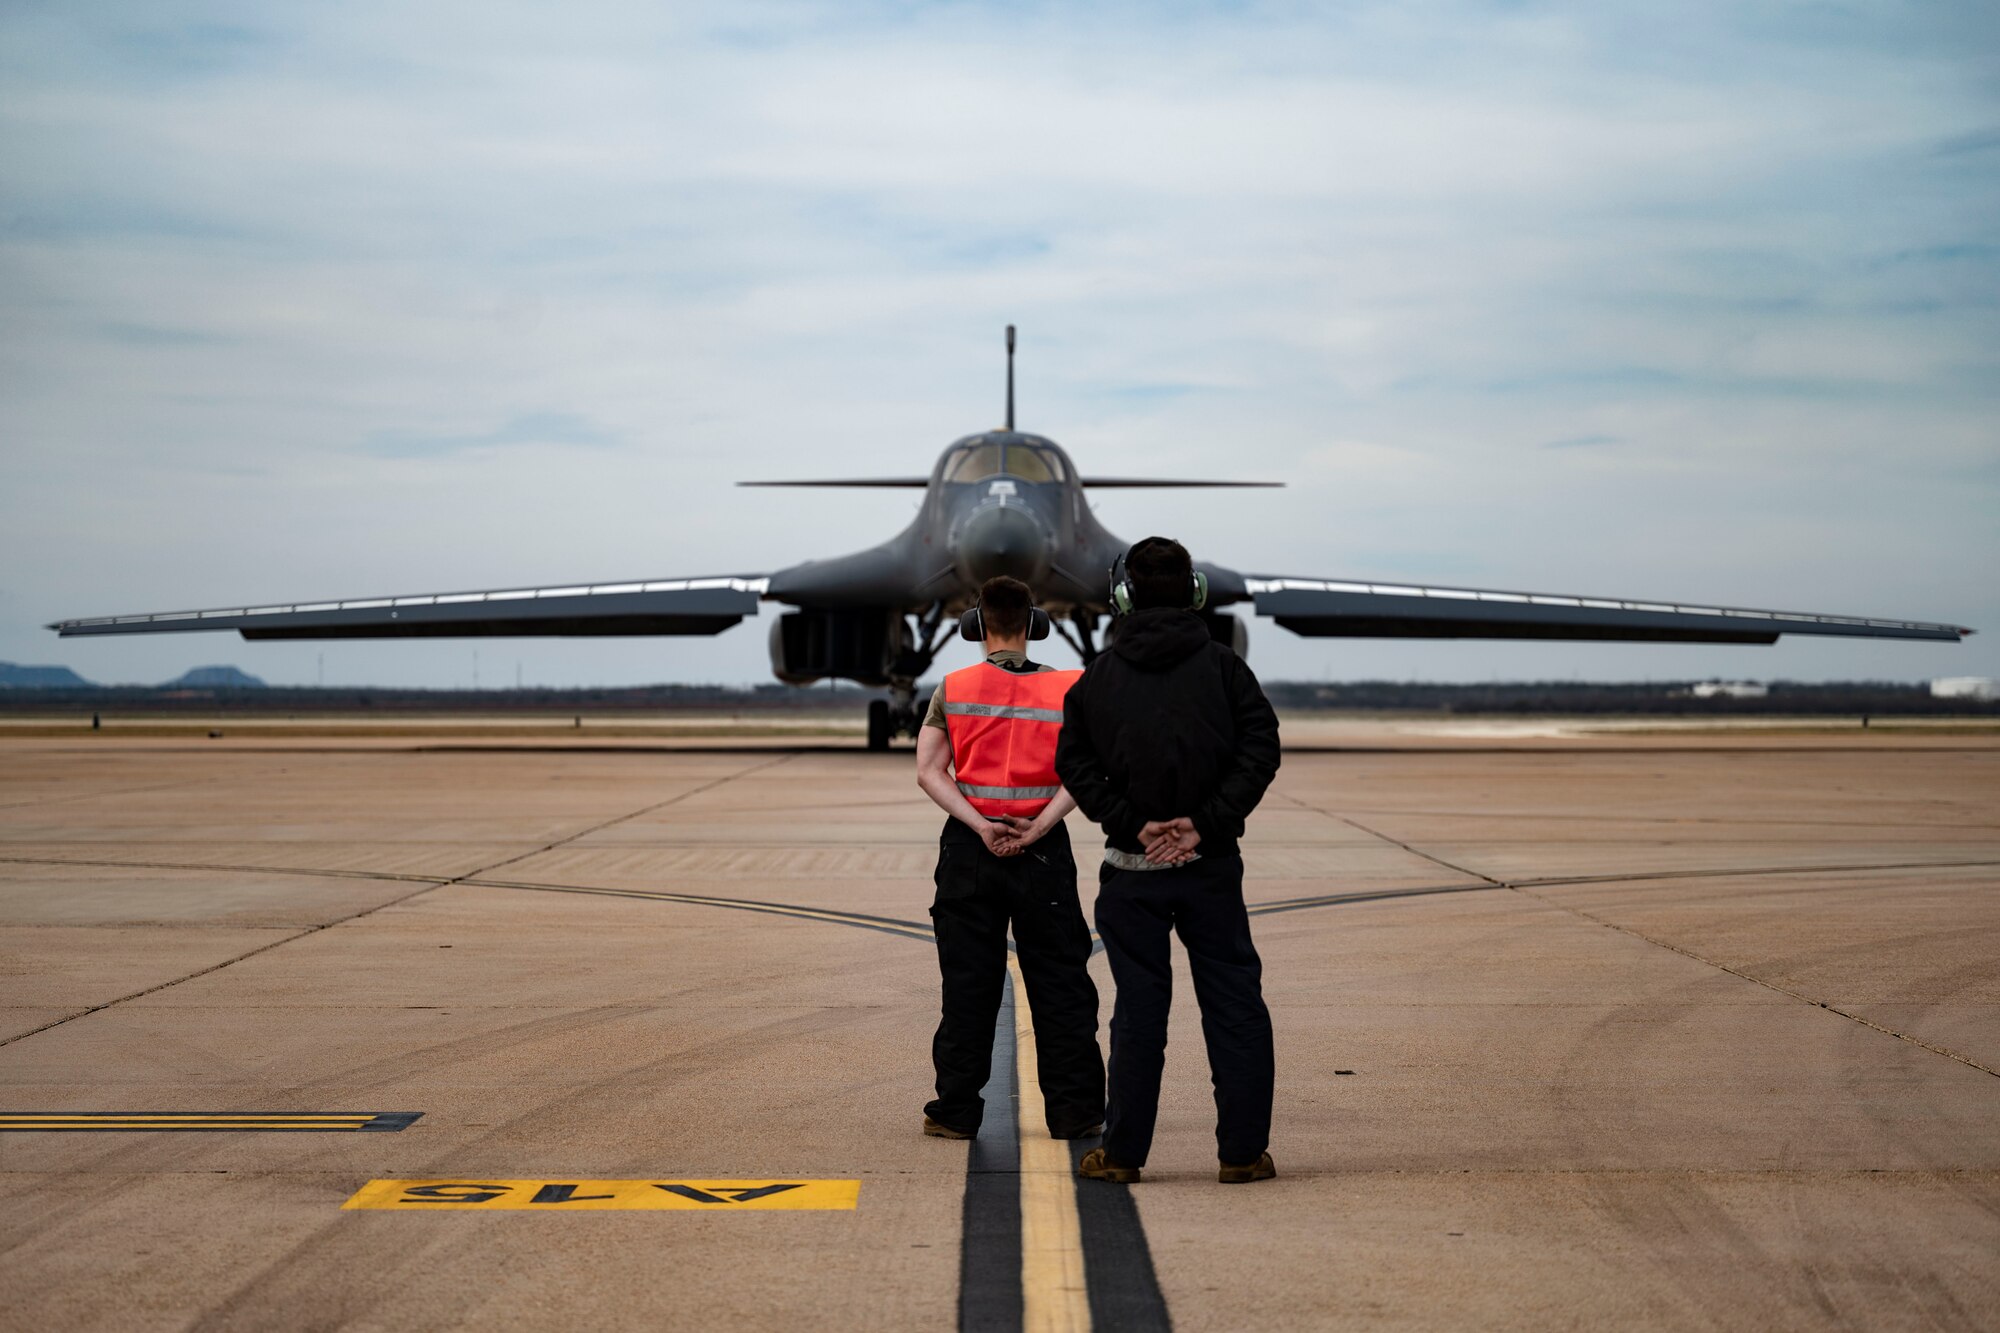 Two 7th Maintenance Group crew chiefs prepare to marshal a B-1B Lancer at Dyess Air Force Base, Texas, March 22, 2023. In preparation for possible inclement weather, Dyess Airmen rapidly prepared over a dozen aircraft to relocate, successfully demonstrating America’s Lift and Strike Base’s ability to achieve dynamic force employment while using agile combat employment. The B-1s were temporarily relocated to Holloman Air Force Base, New Mexico, while the C-130s flew to several airfields throughout the United States. (U.S. Air Force photo by Airman Emma Anderson)